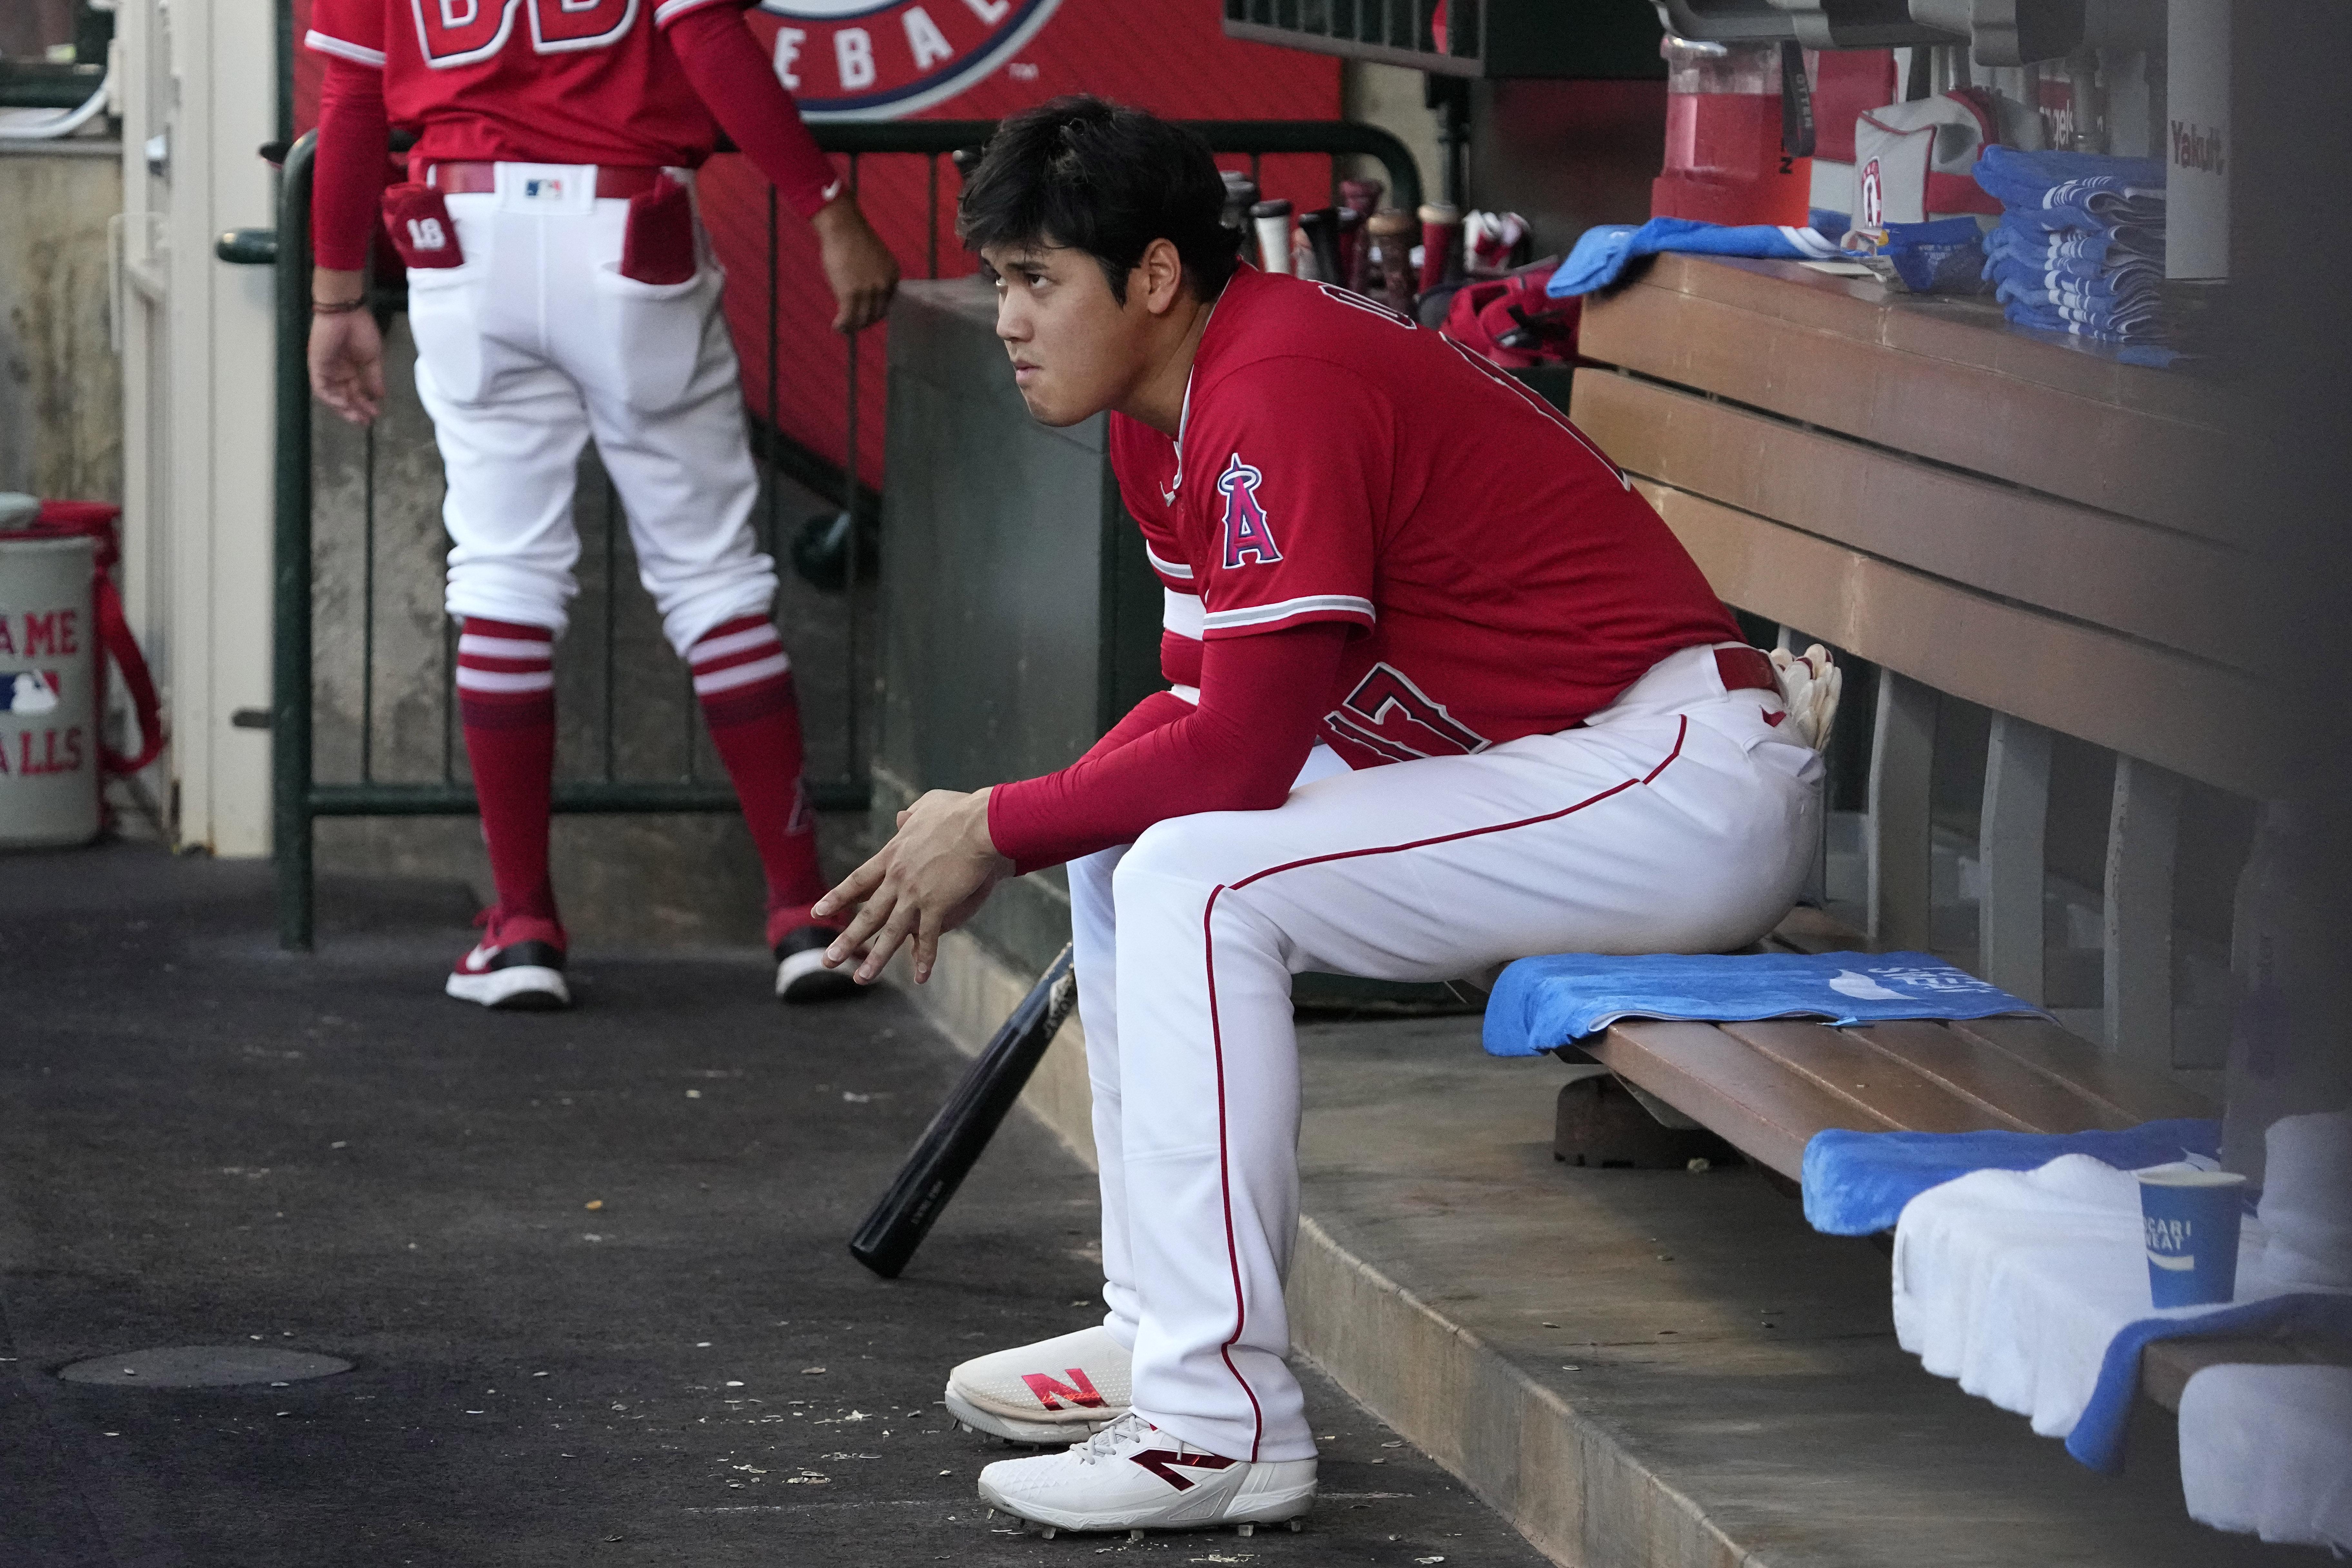 MLB/ Ohtani leaves Angels game with blister, says he doesn't plan